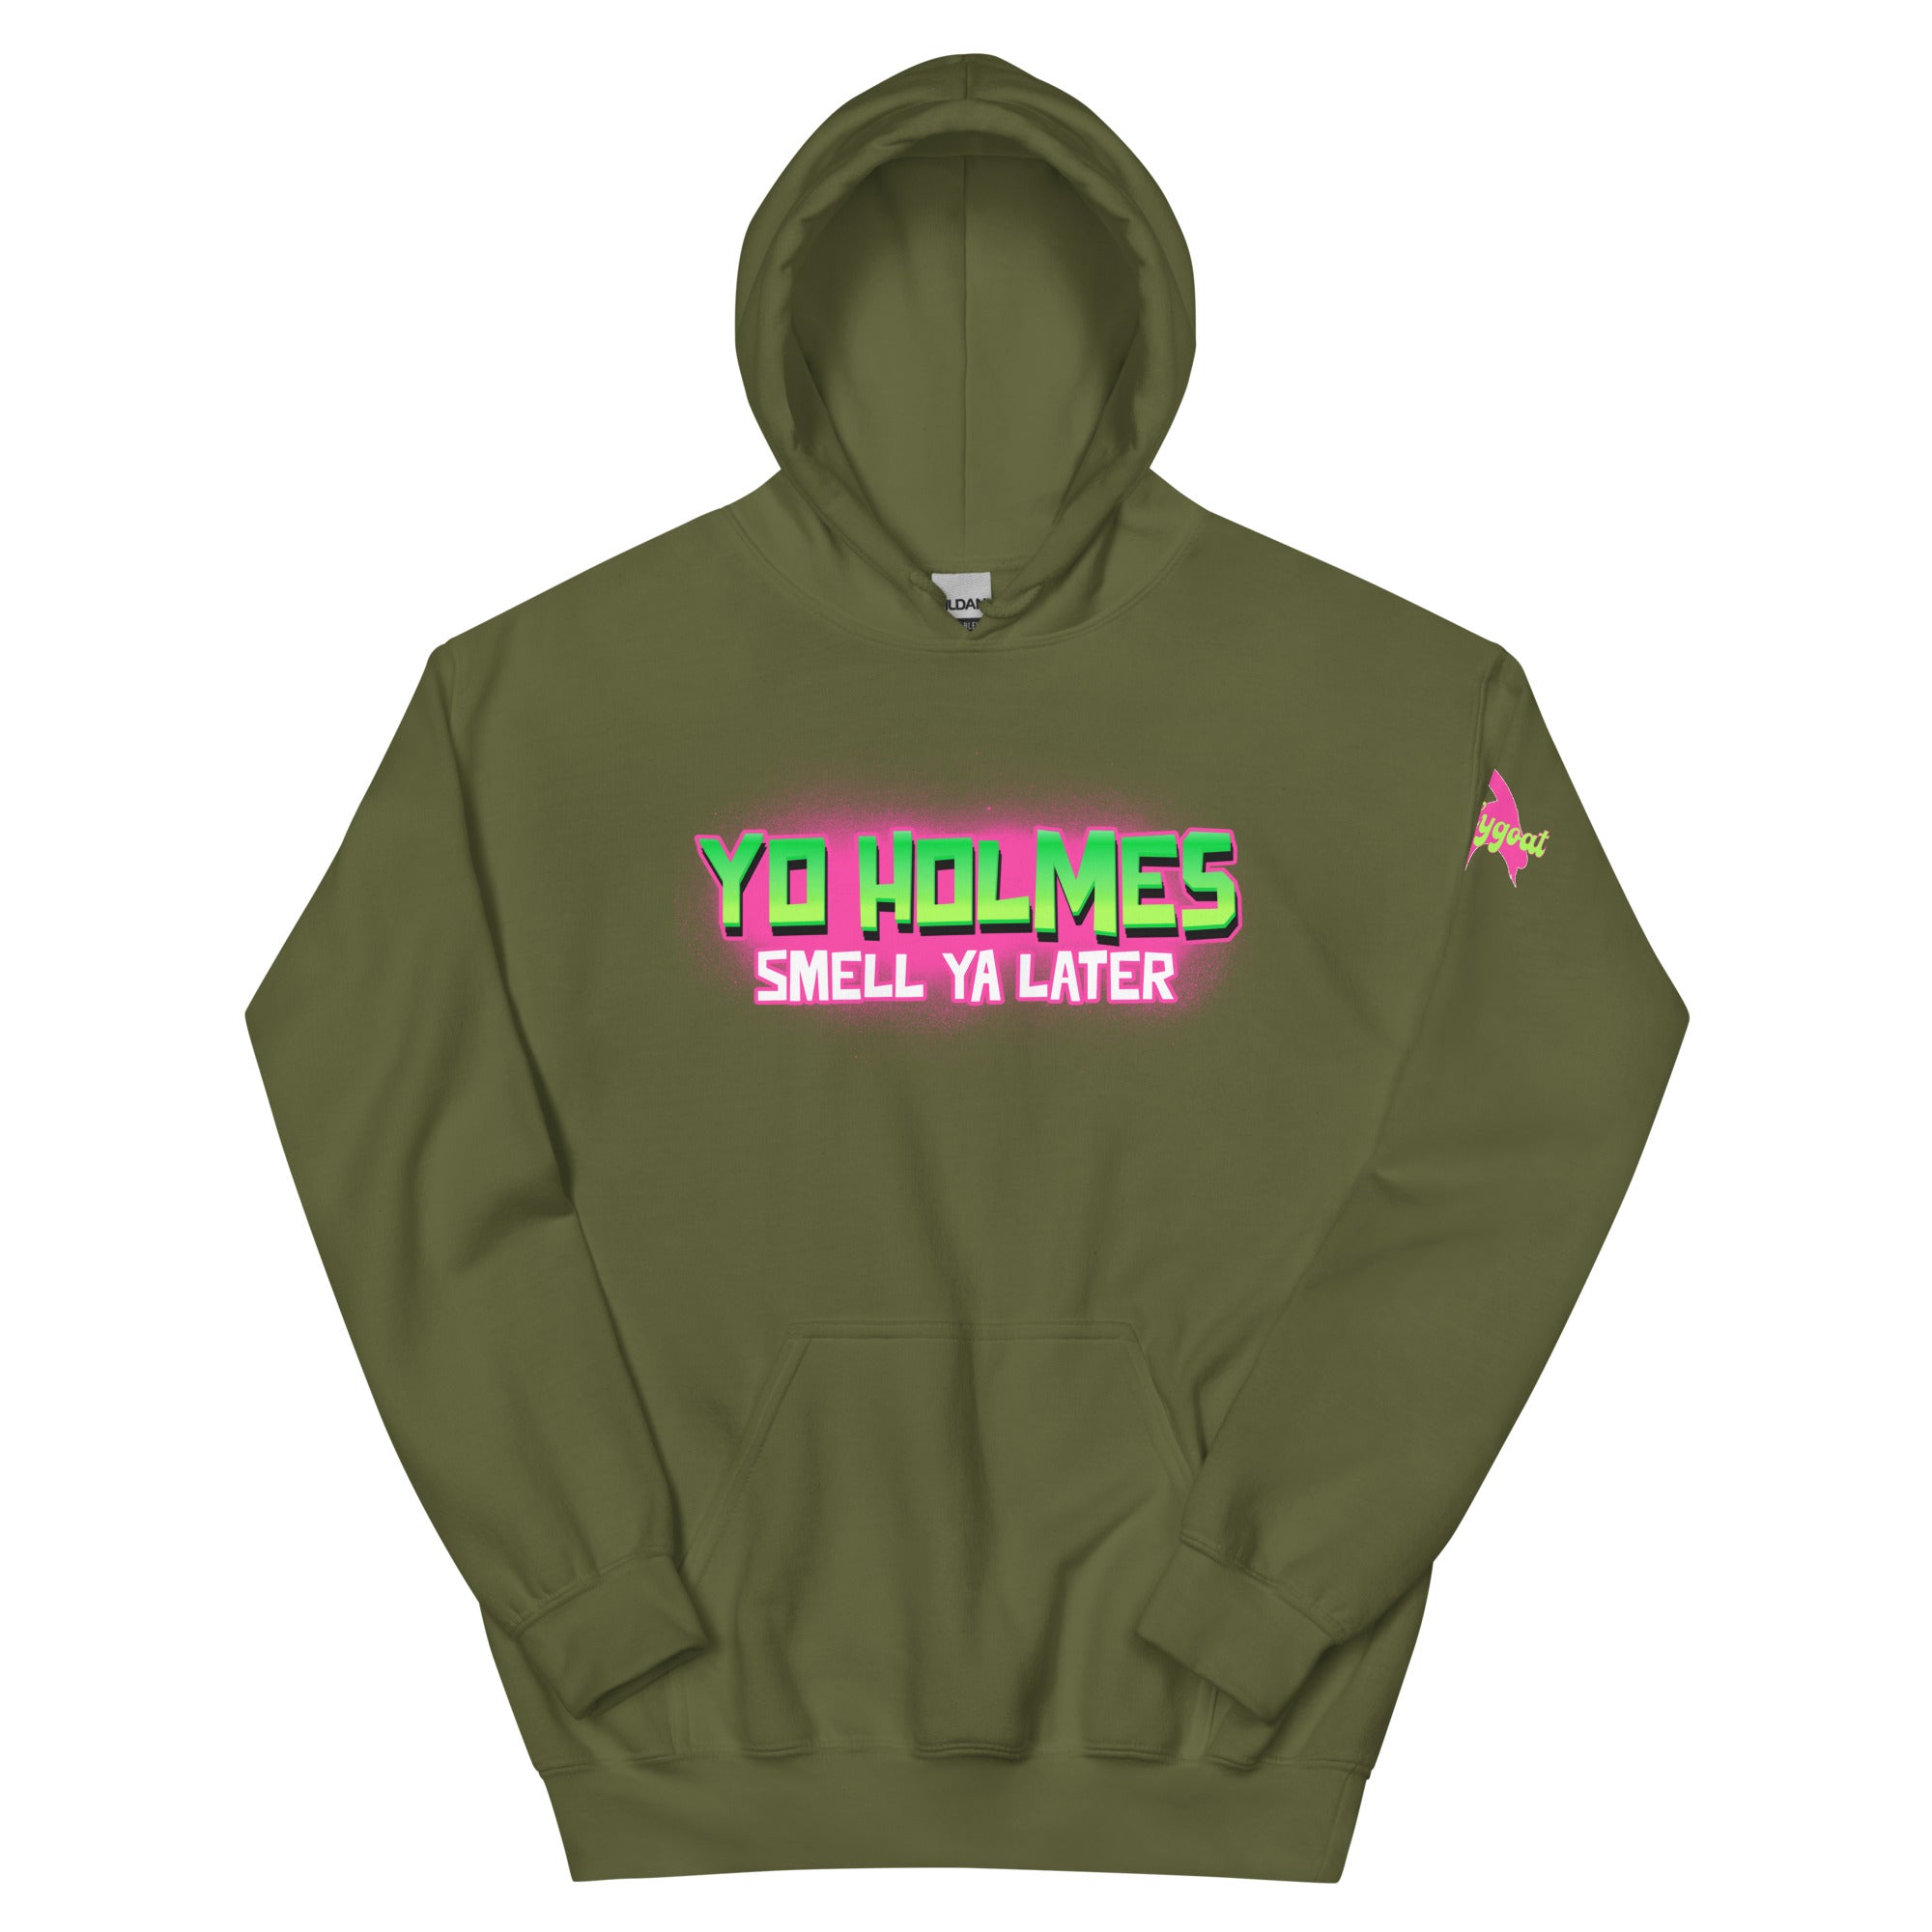 Fresh Prince of Bel Air army green hoodie Phillygoat